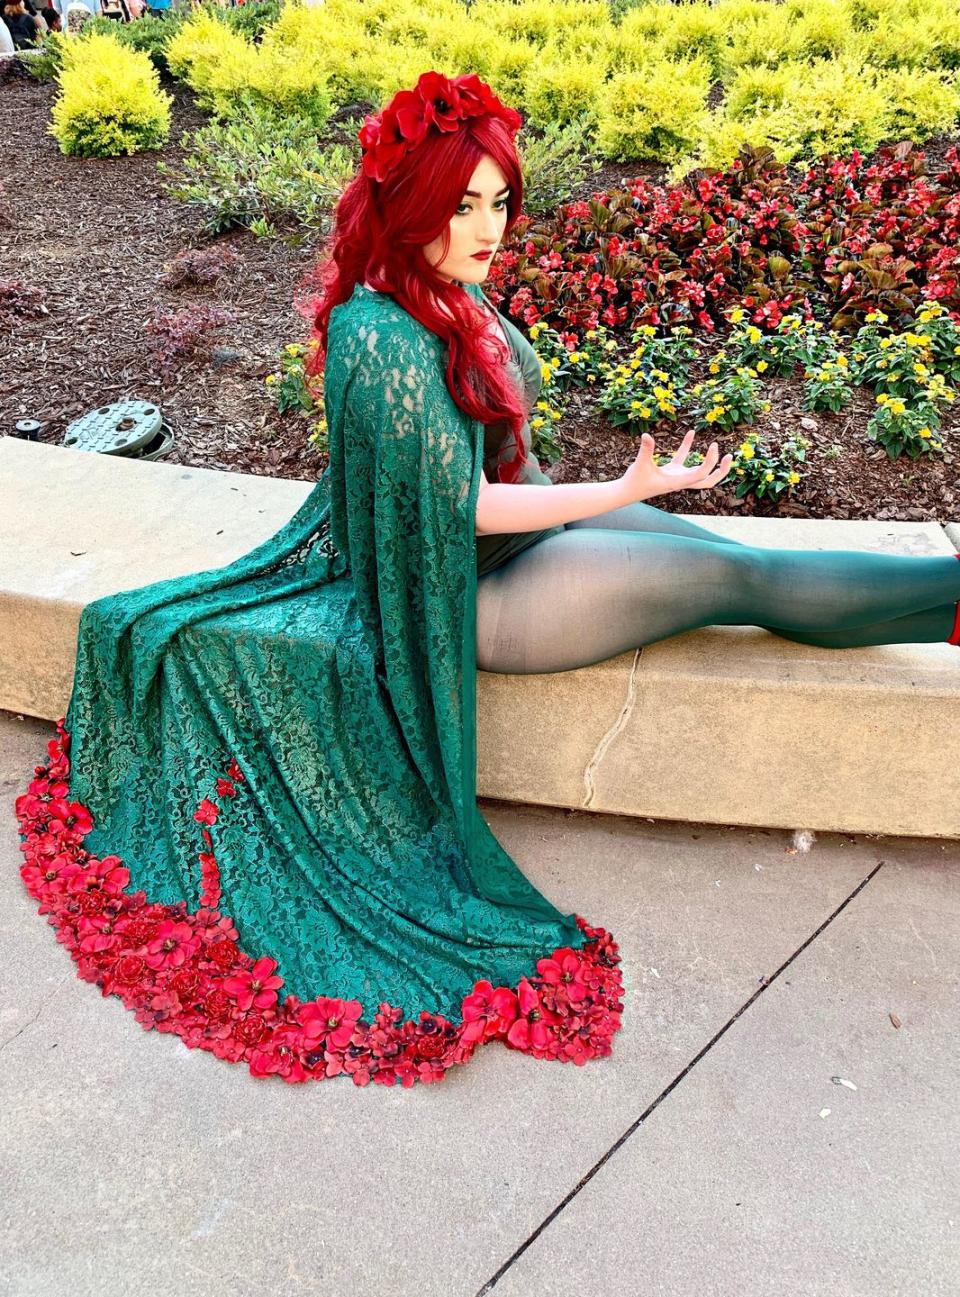 3) Caped Poison Ivy Costume